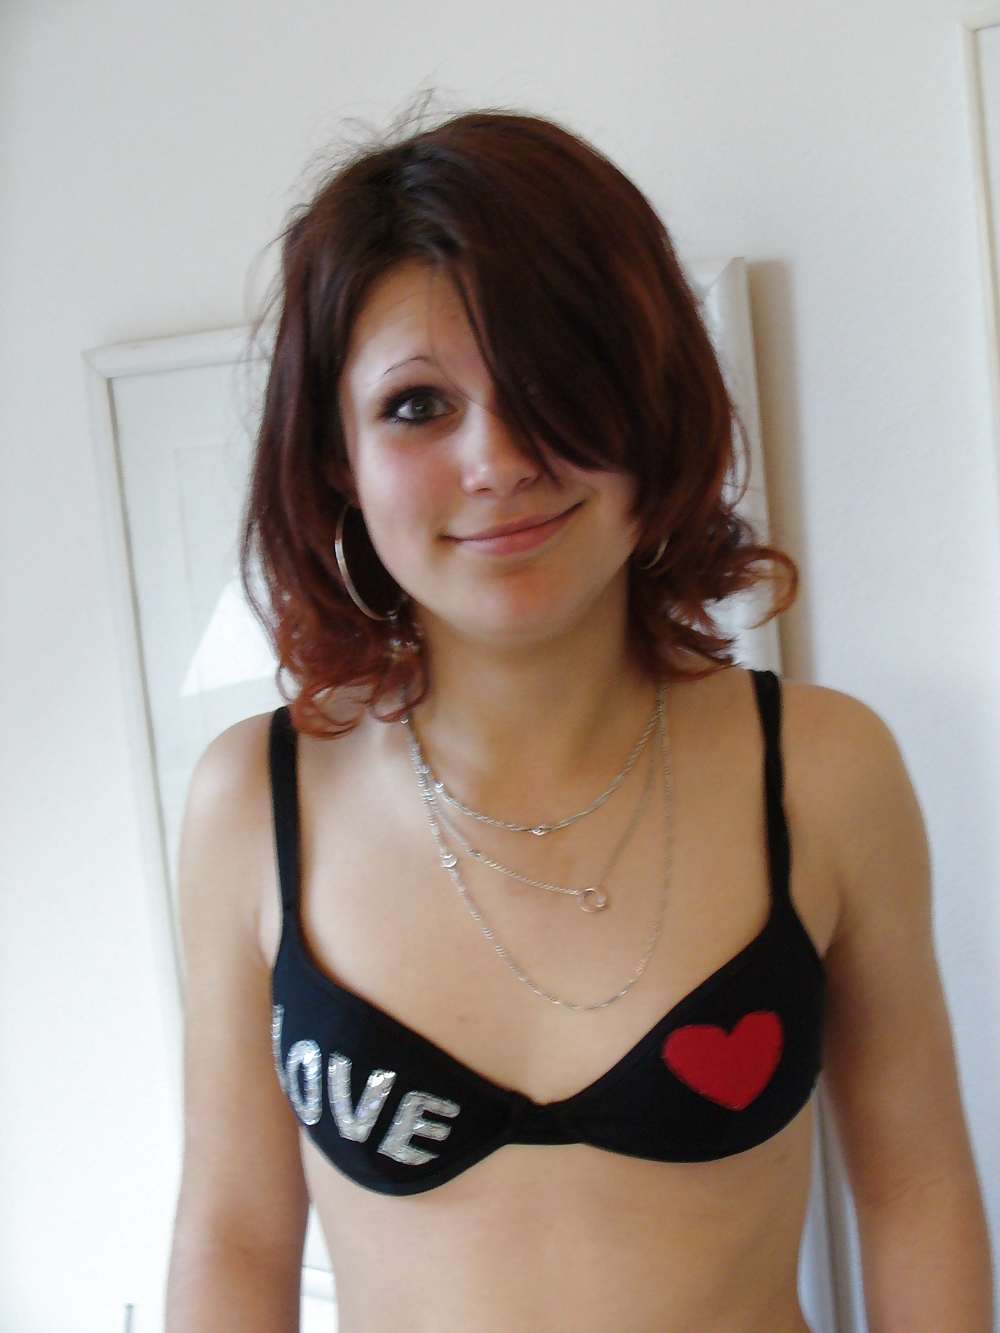 Private pics of a sweet teen #10869747